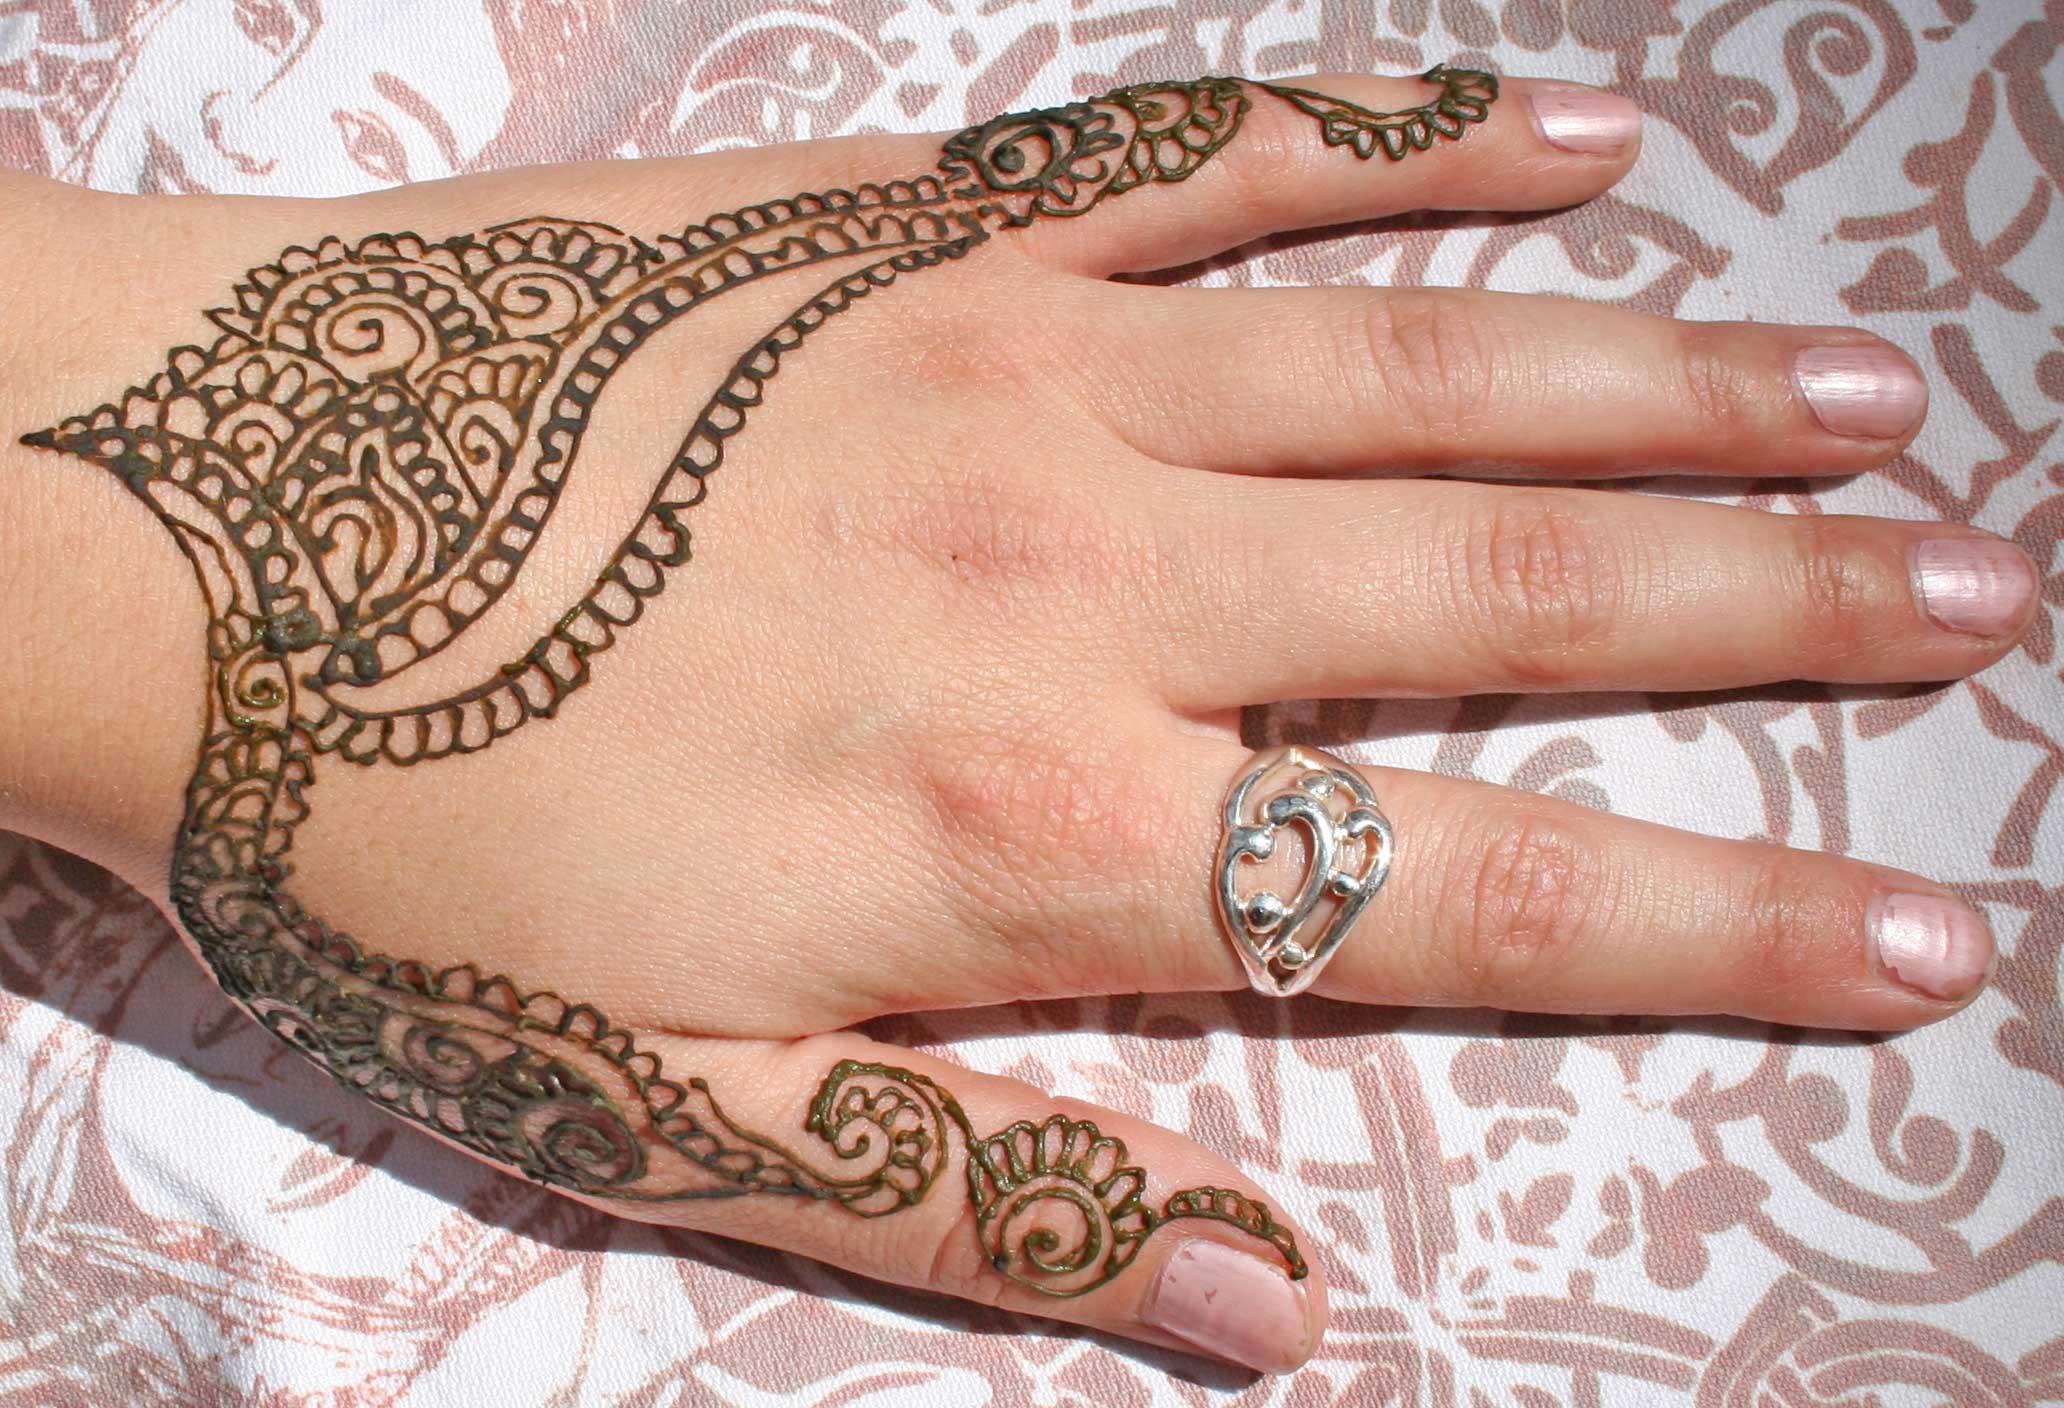 1. The History and Meaning of Henna Tattoos - wide 4